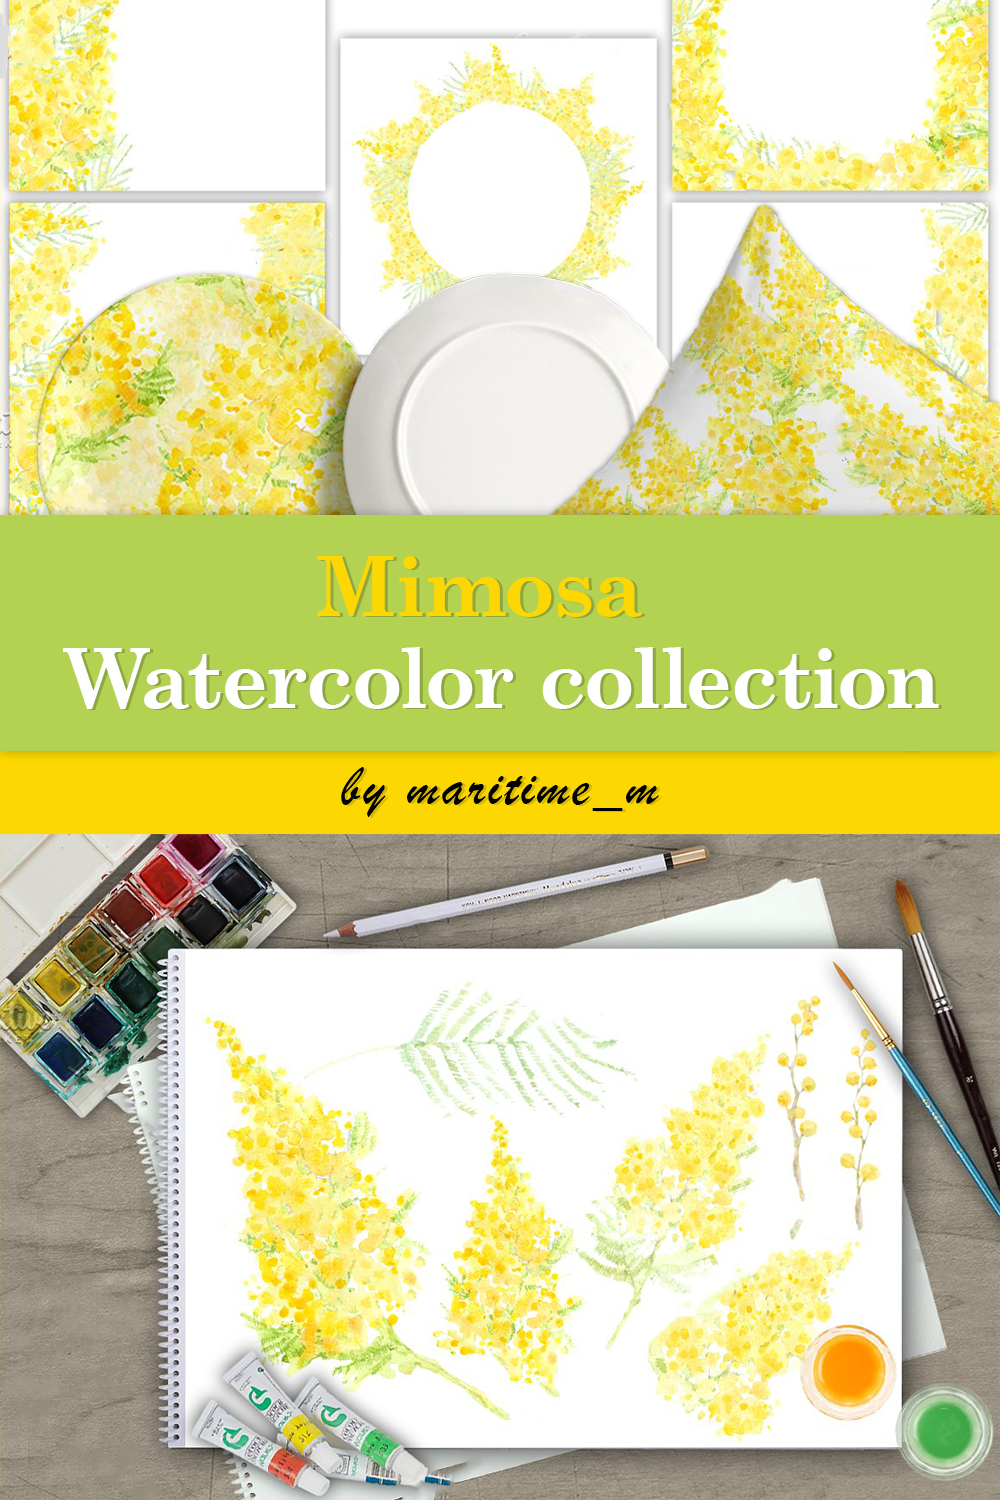 Mimosa. watercolor collection of pinterest.